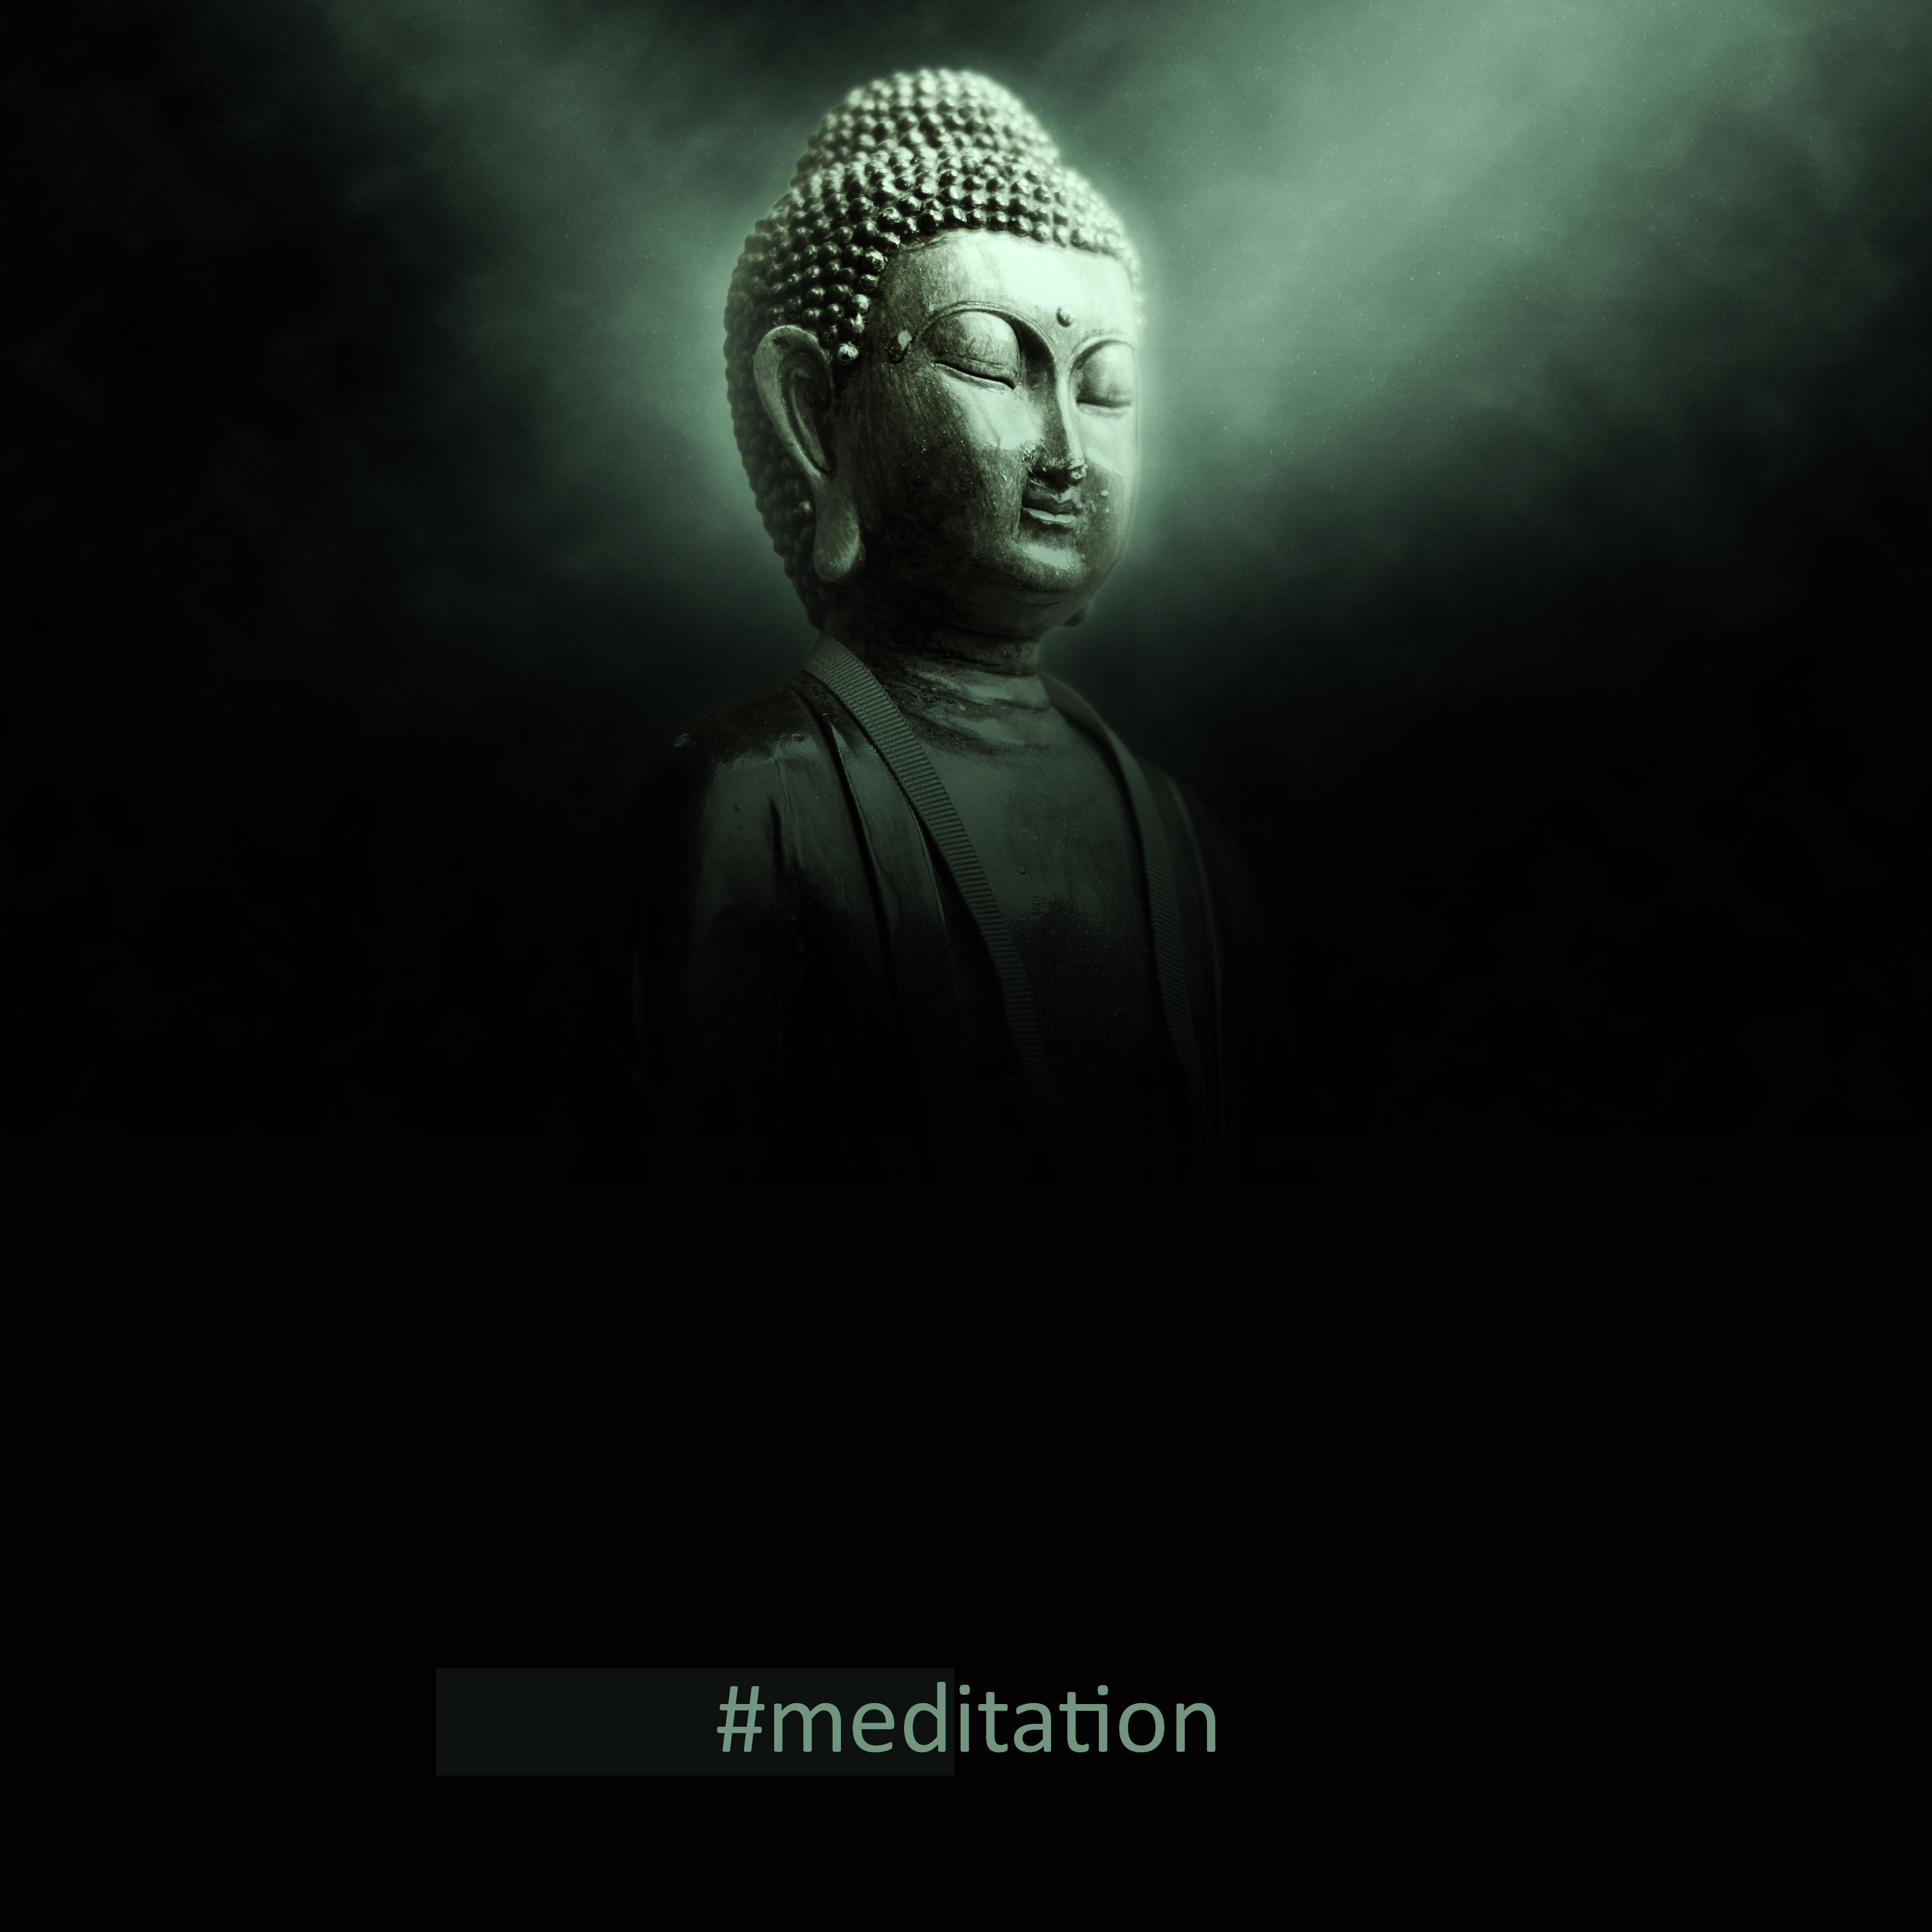 #meditation: Gentle, Quiet and Soothing Music, Sounds of Rain and Water, Perfect for Meditation, as well as for Rest, Relaxation and Tranquility